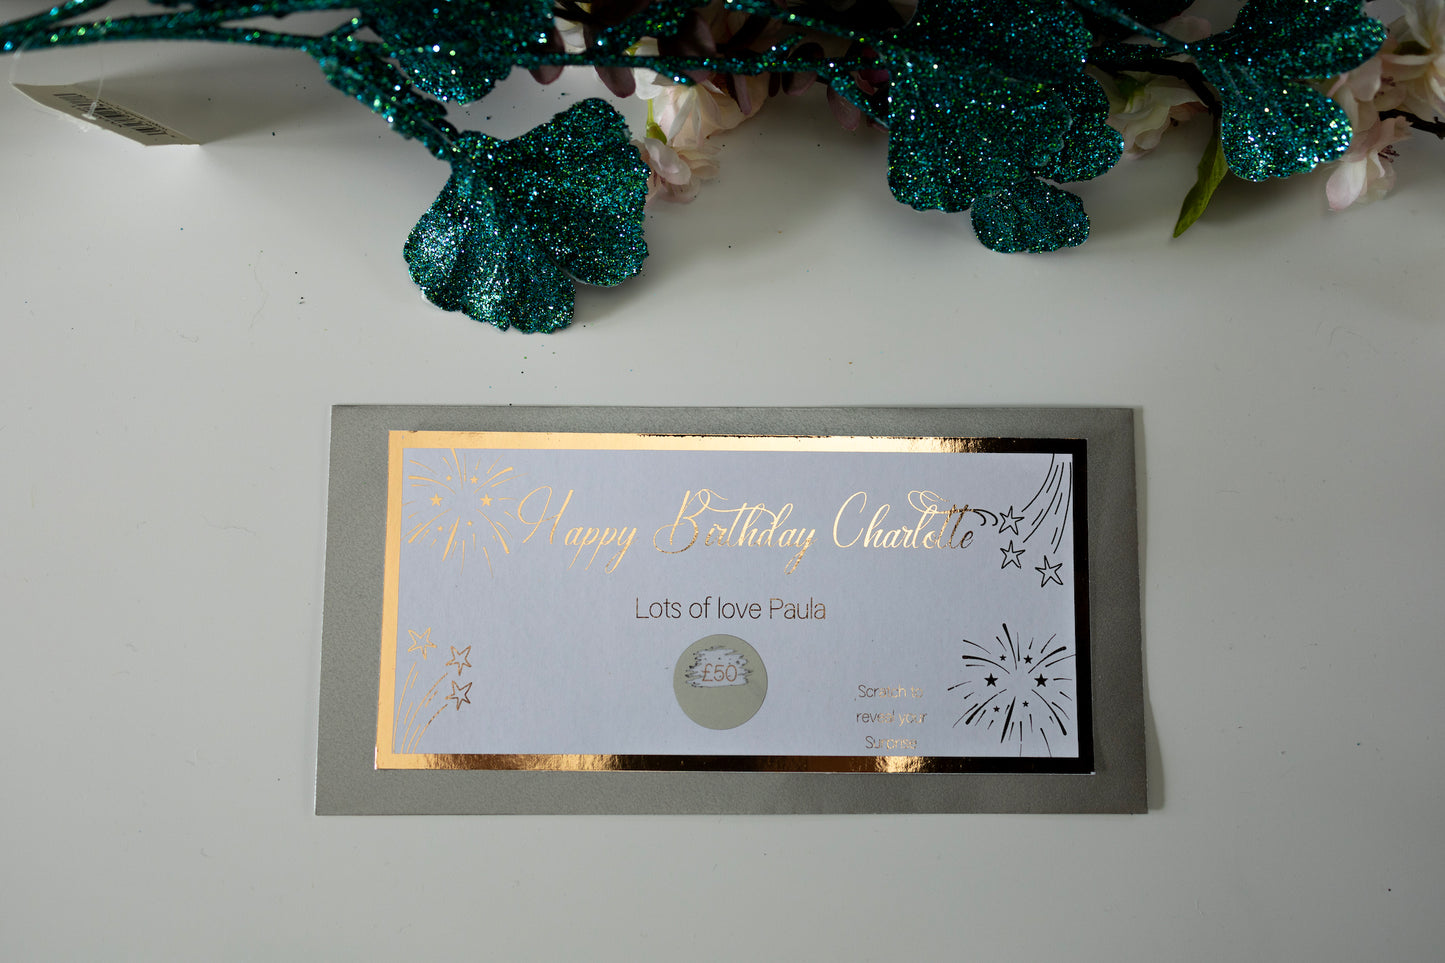 Birthday Surprise Reveal Gift, Golden Ticket, Birthday foiled Scratch Card, Personalised Gift Voucher, Surprise Gift, Gift Ticket